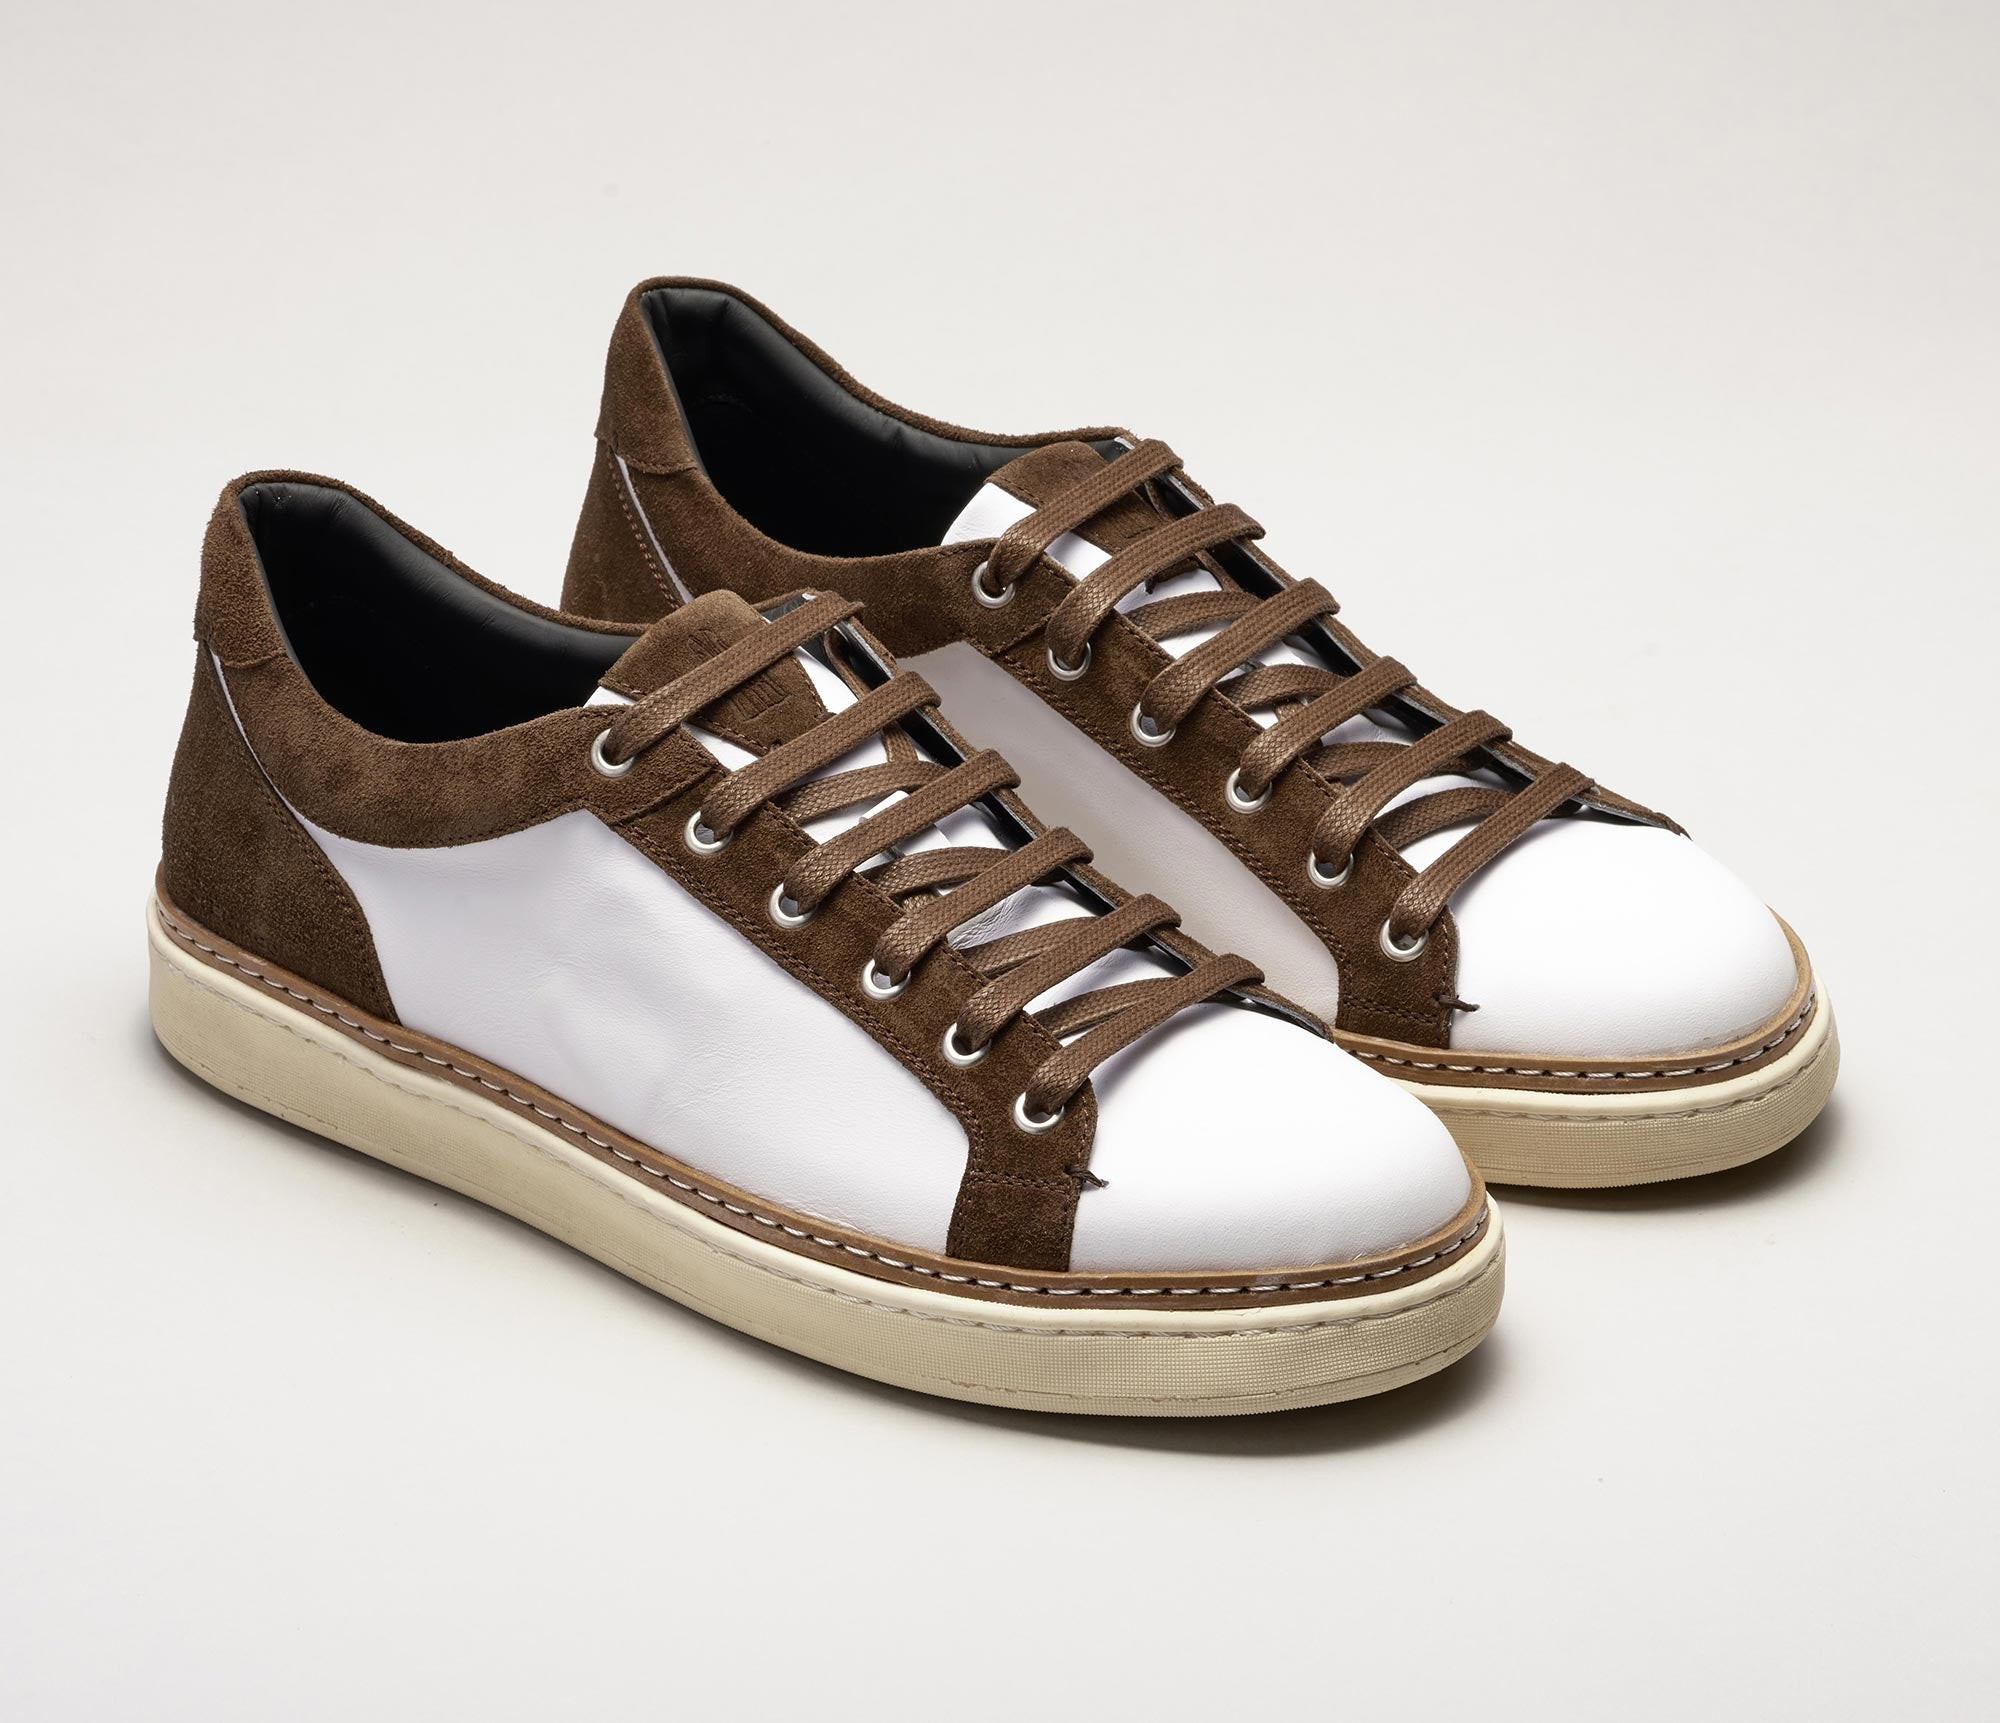 Binetto Suede Sneakers in Ciana Brown